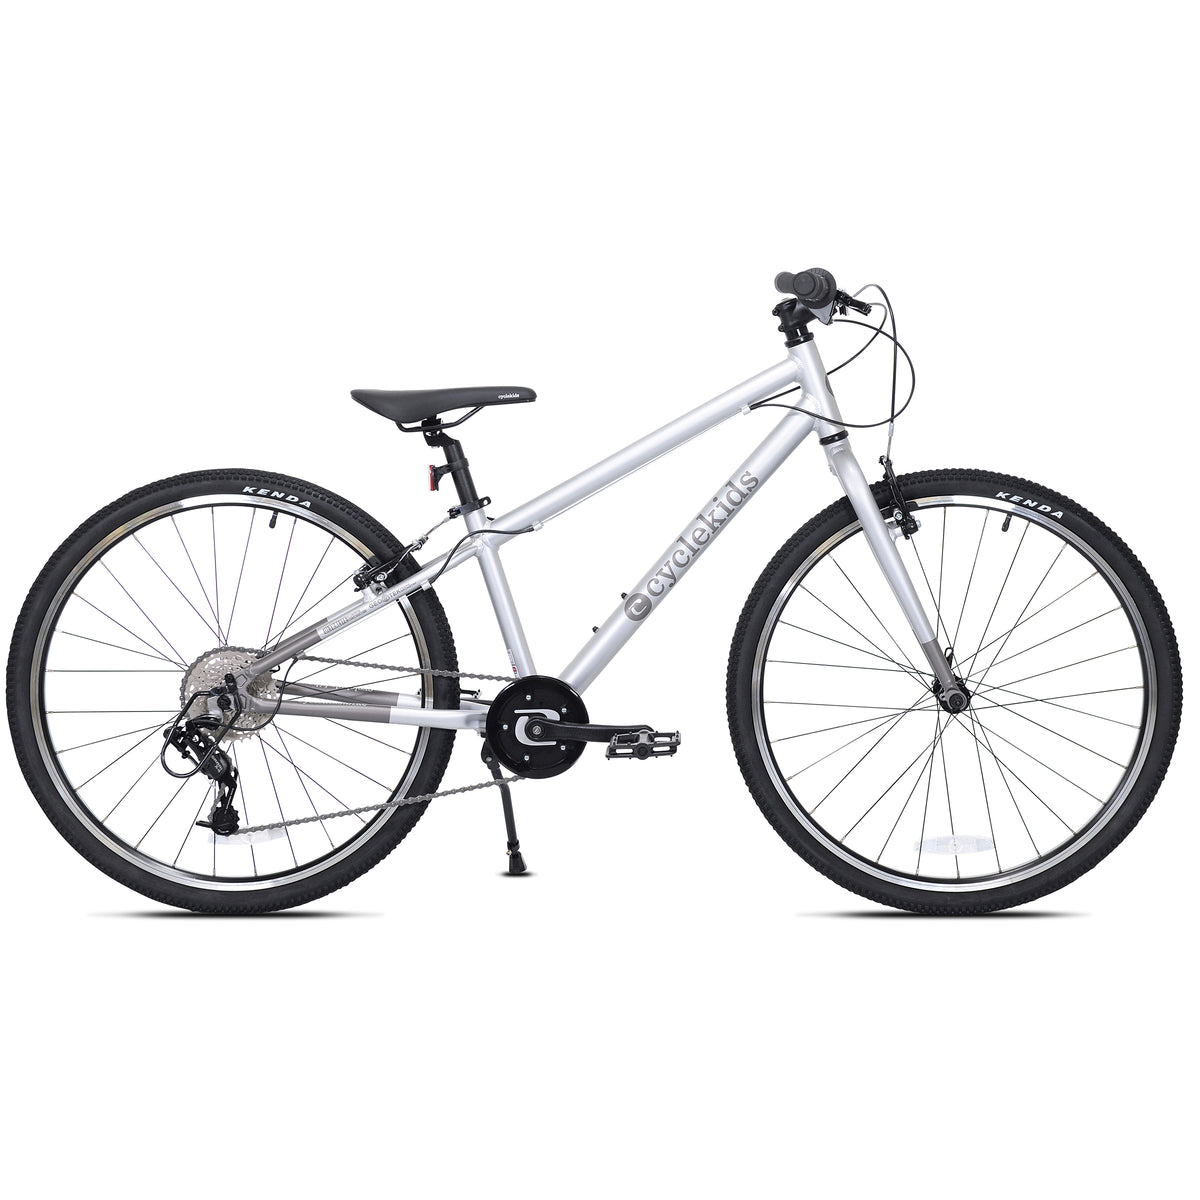 26" CYCLE Kids™ | Mountain Bike for Kids Ages 12+